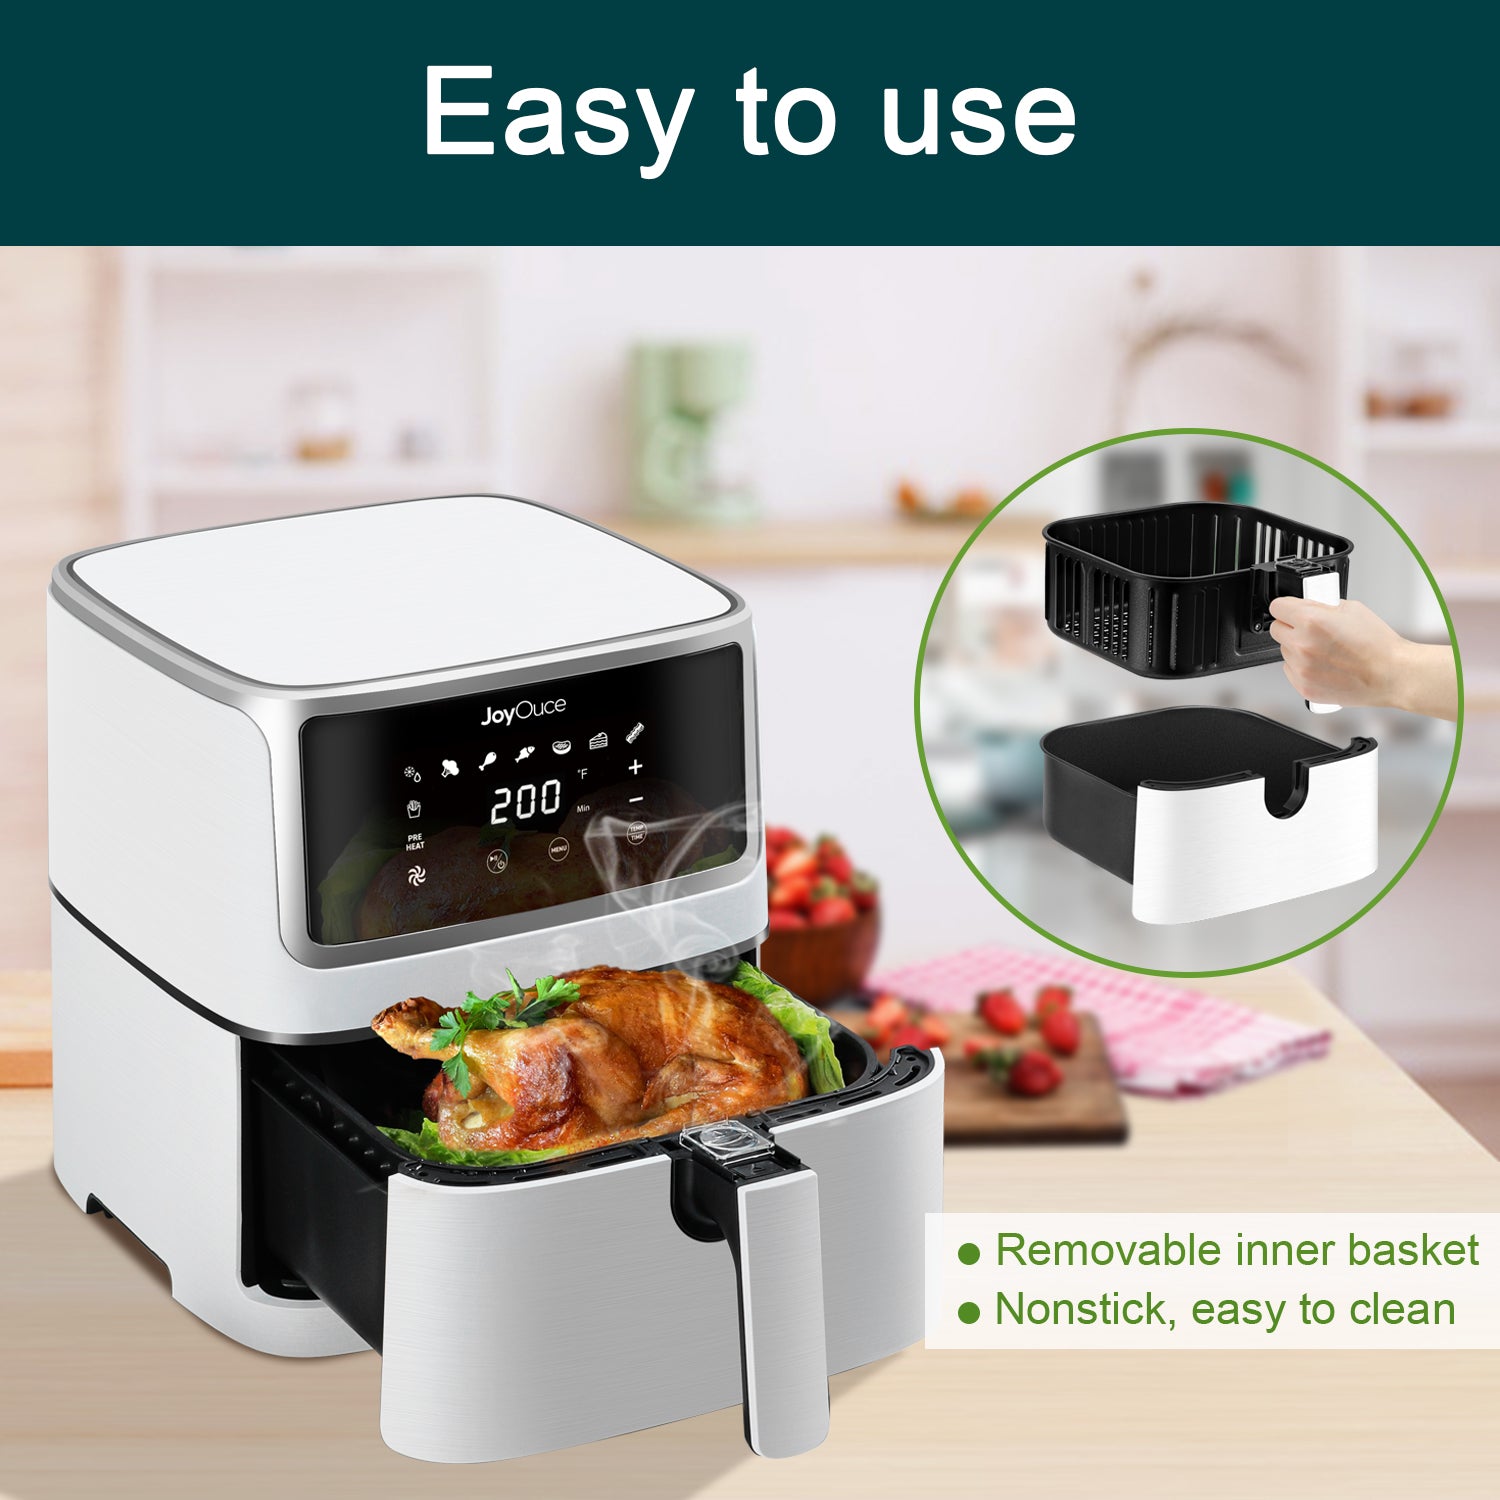 JoyOuce Air Fryer 5.8 QT with Extra Air Fryer Accessories for Oilless Cooking,Smart Touch Screen with 8 Presets,1700W (5.8qt, white-2a)